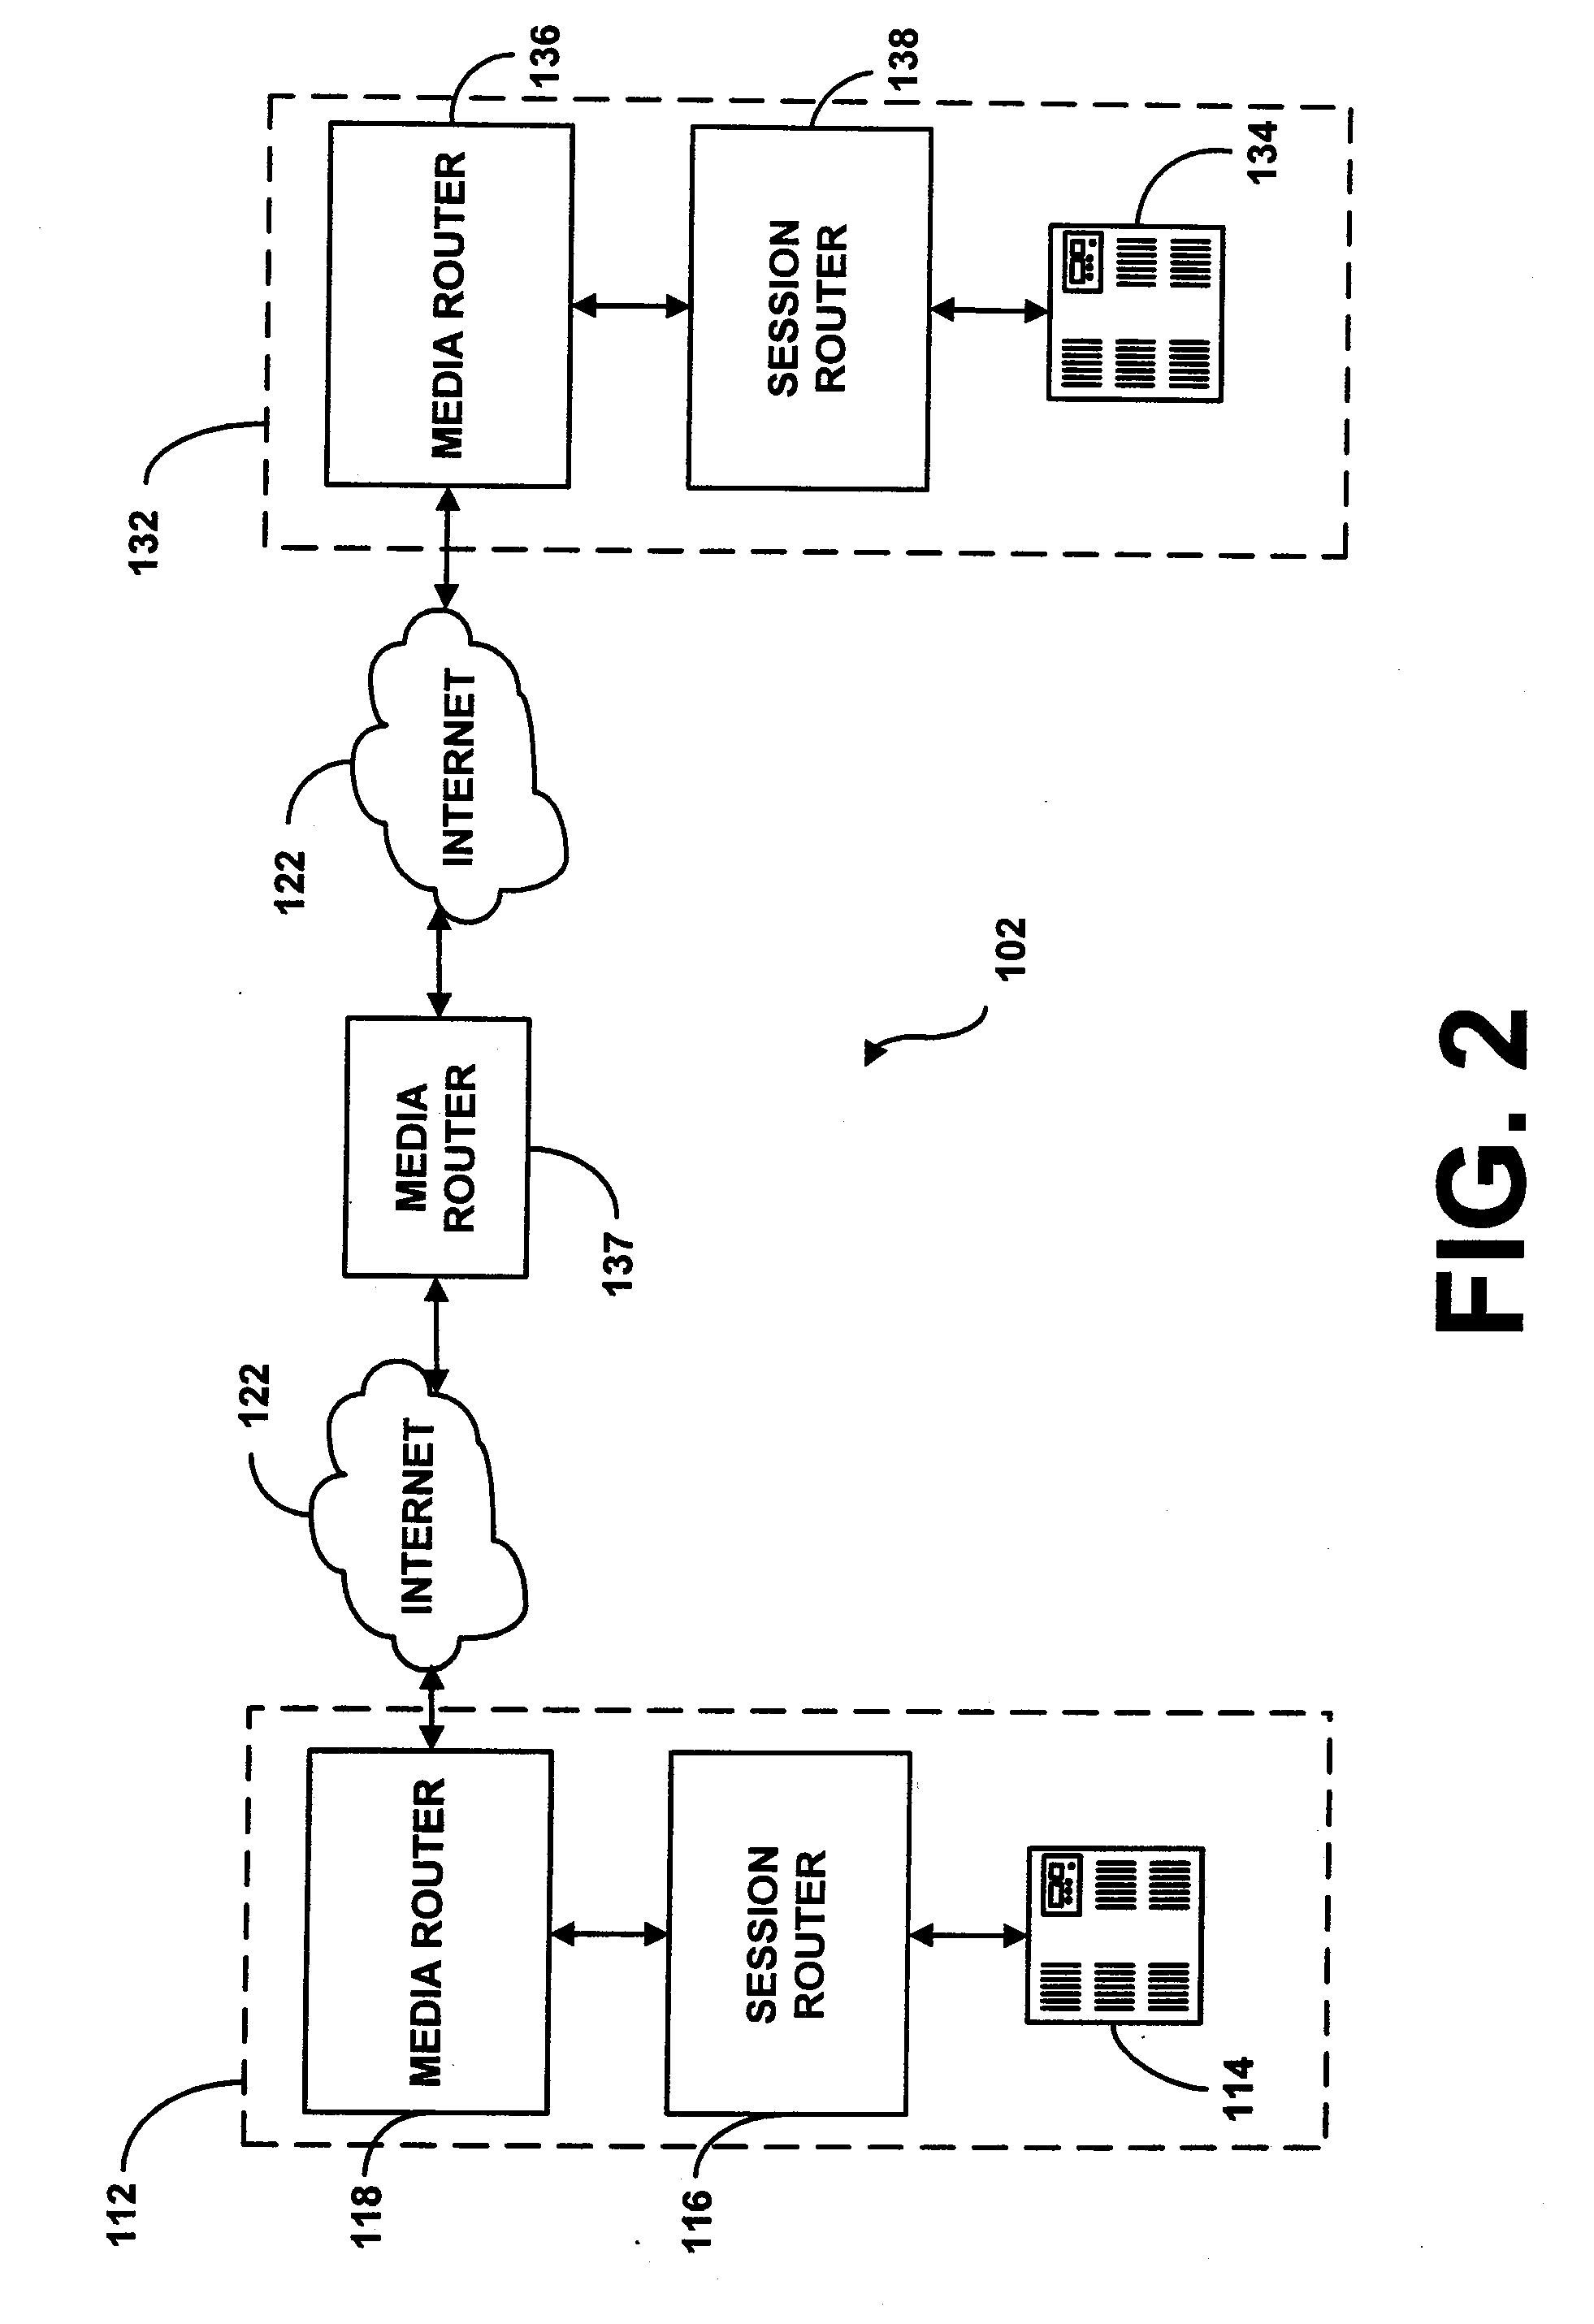 System and Method for Determining Flow Quality Statistics for Real-Time Transport Protocol Data Flows